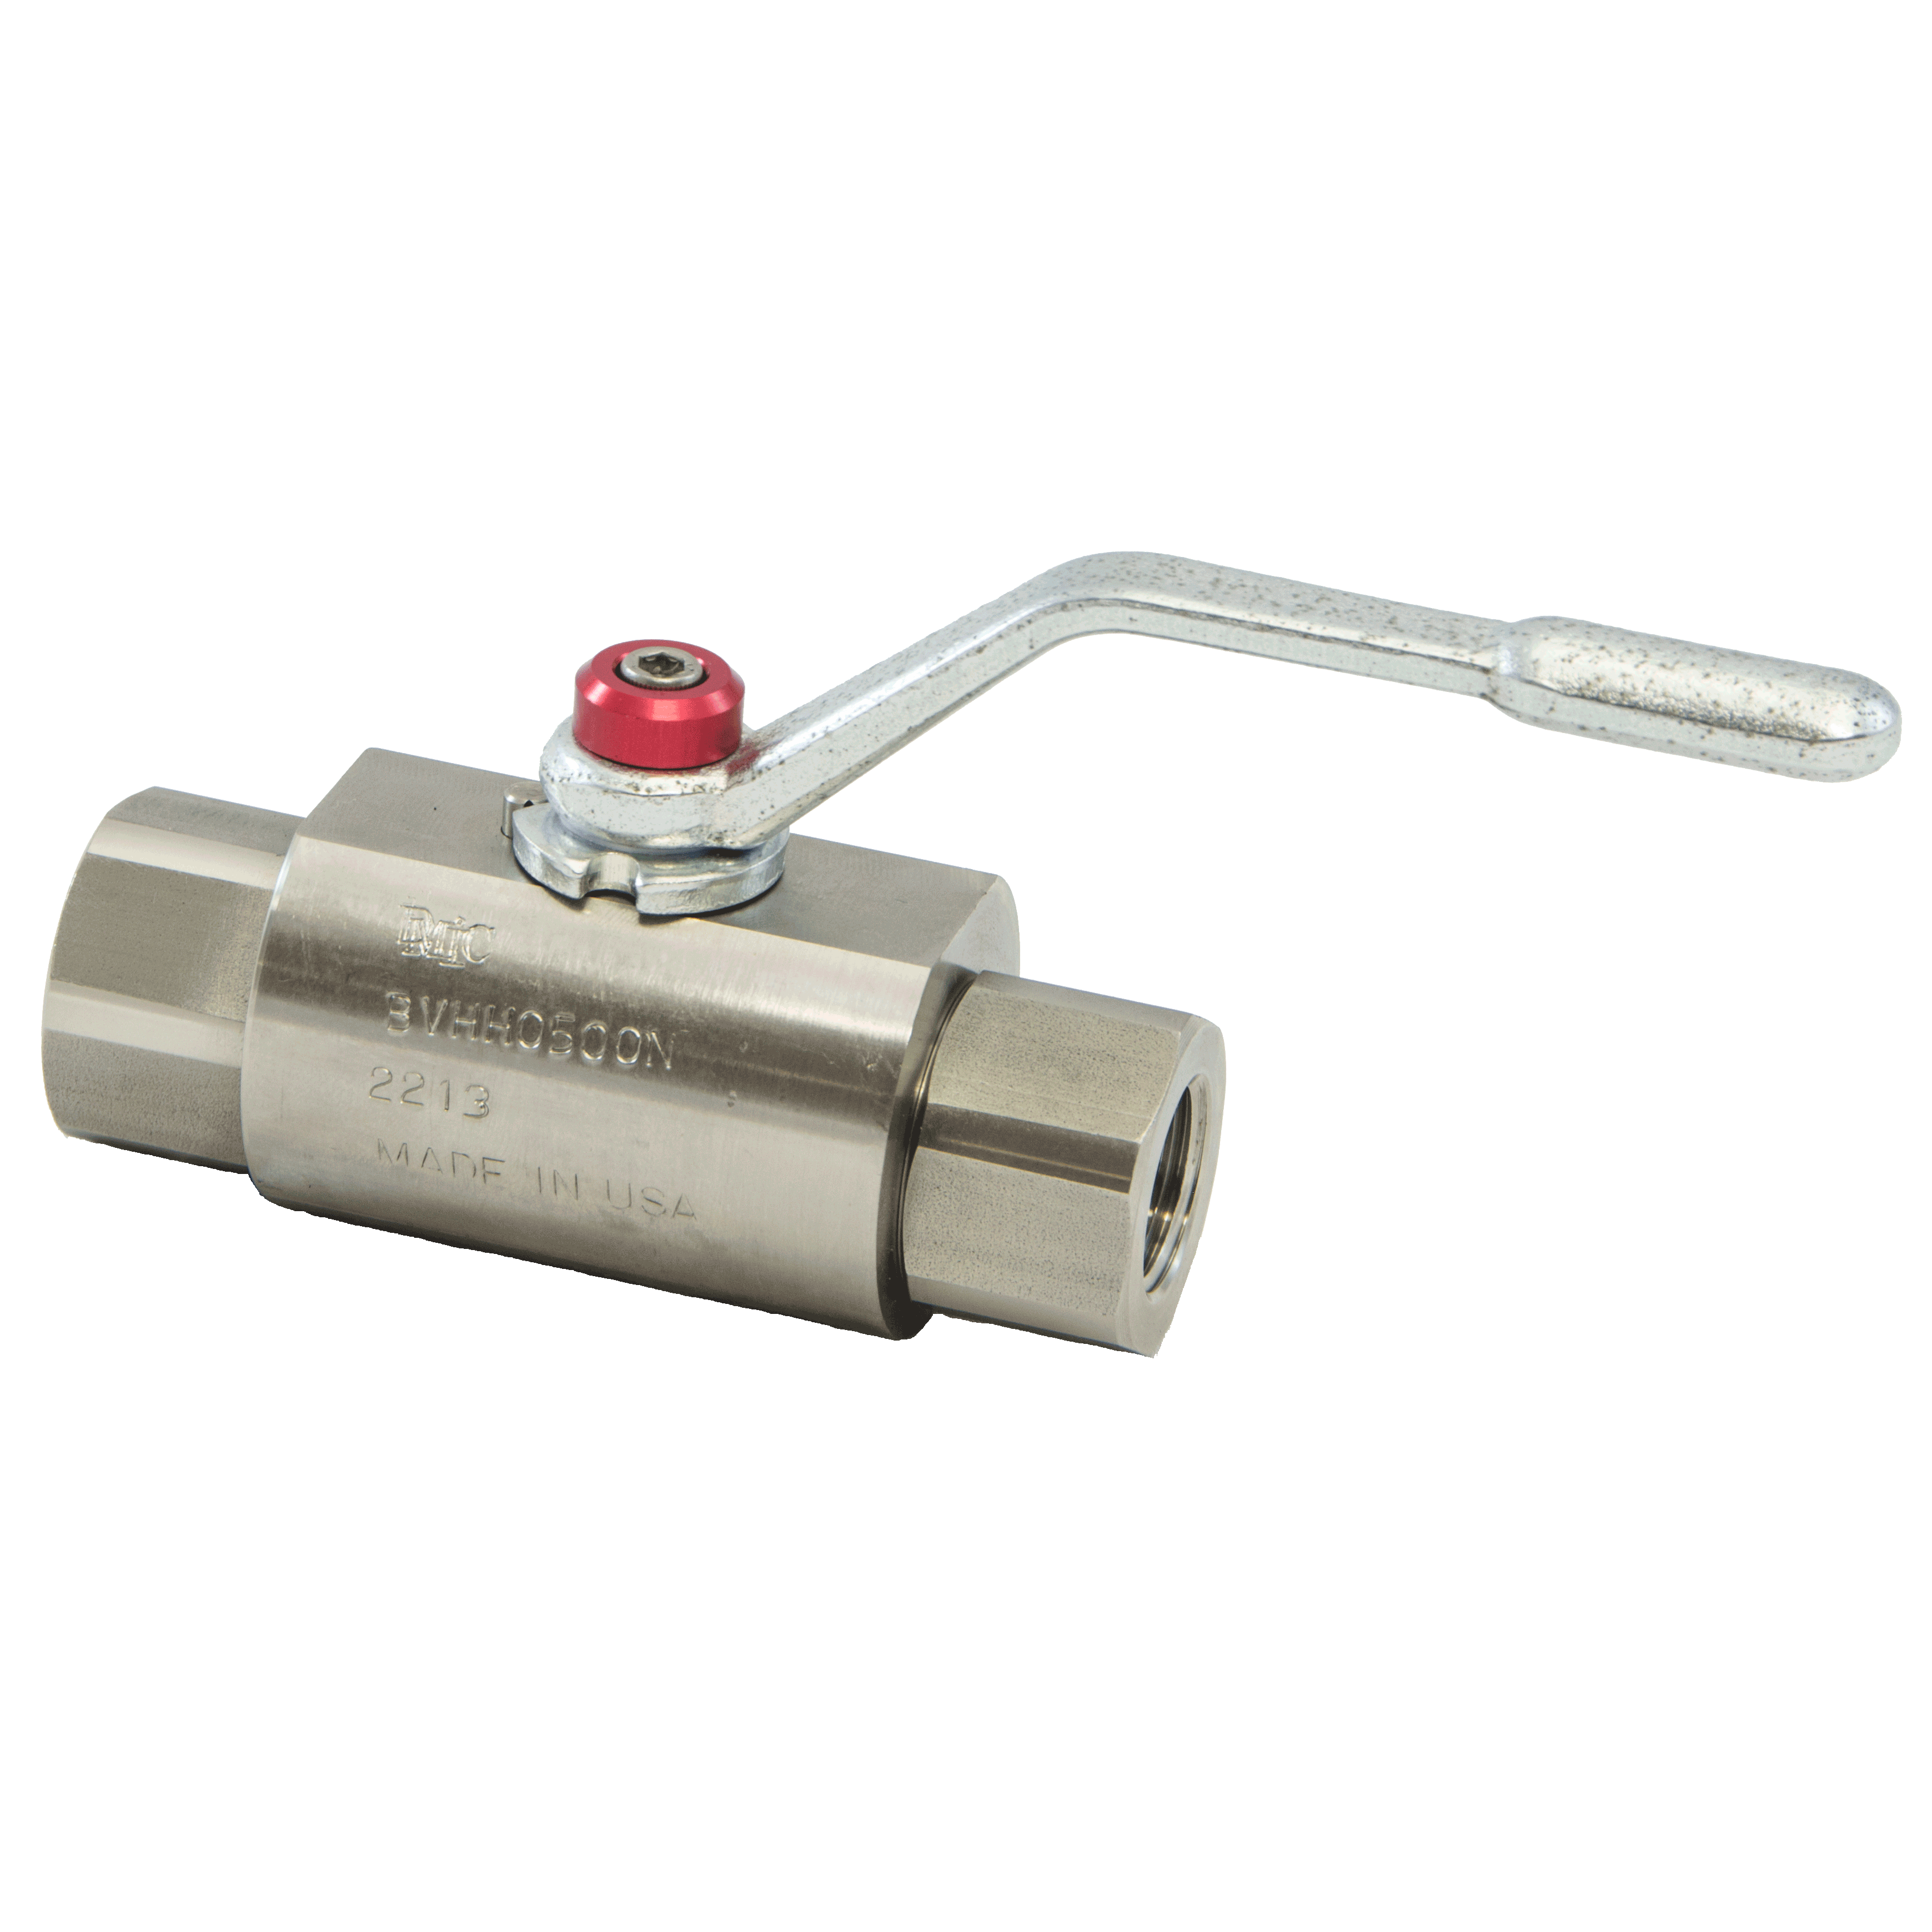 BVHH-1000N-2211 : DMIC Super High Pressure Ball Valve, 1 NPT, 316 Stainless Steel, 10000psi, Two-Way